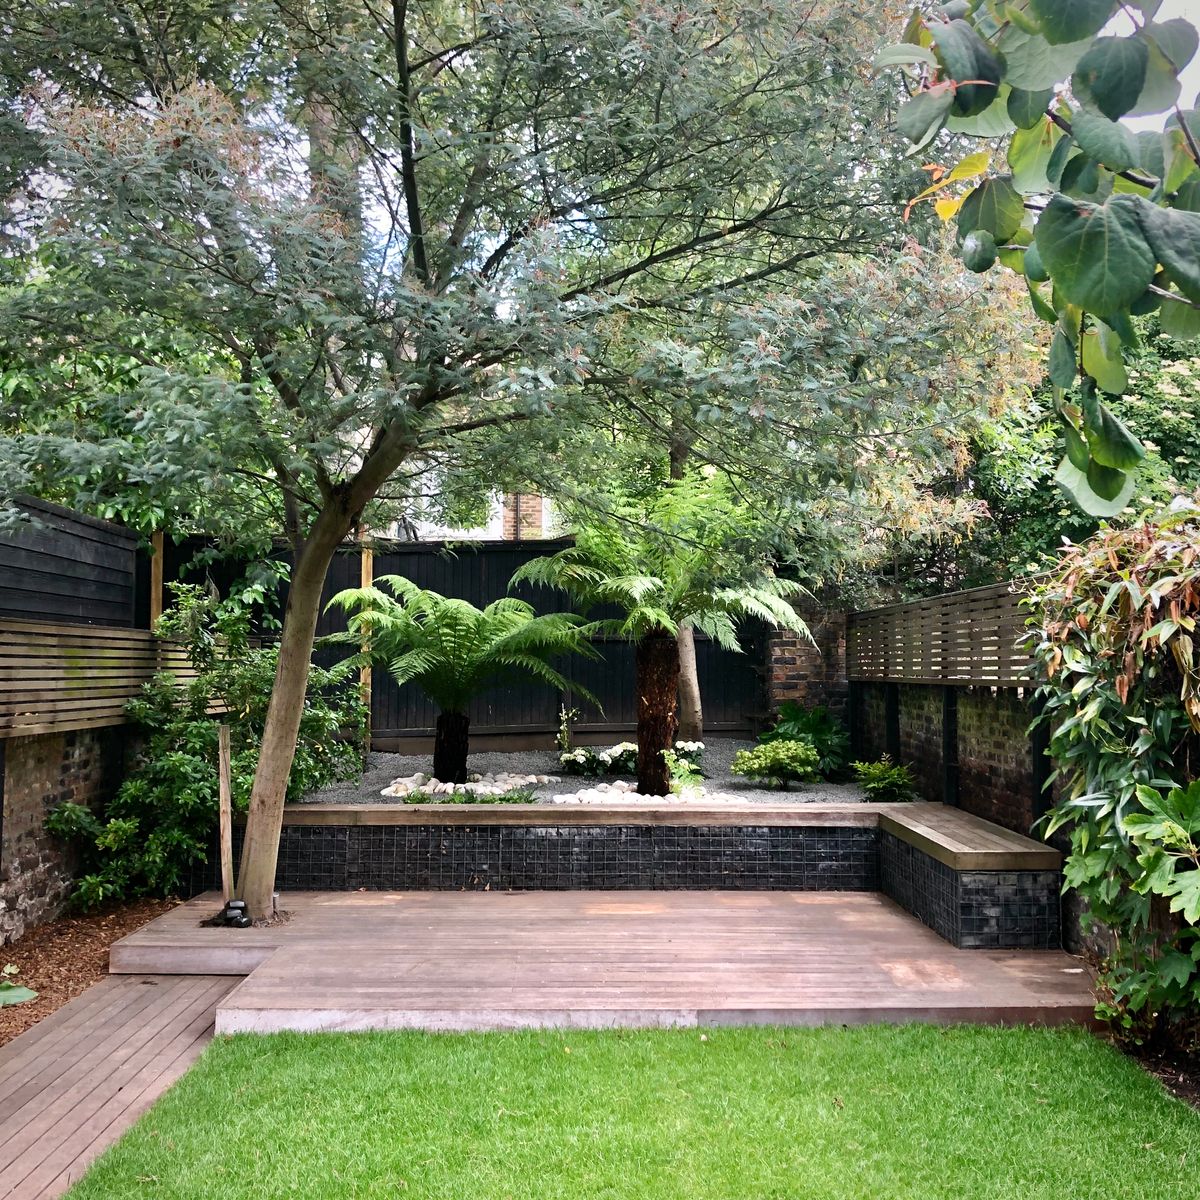 Garden Landscape Planting Design in North London Crouch End with Exotic Tree Ferns and Lush Greenery